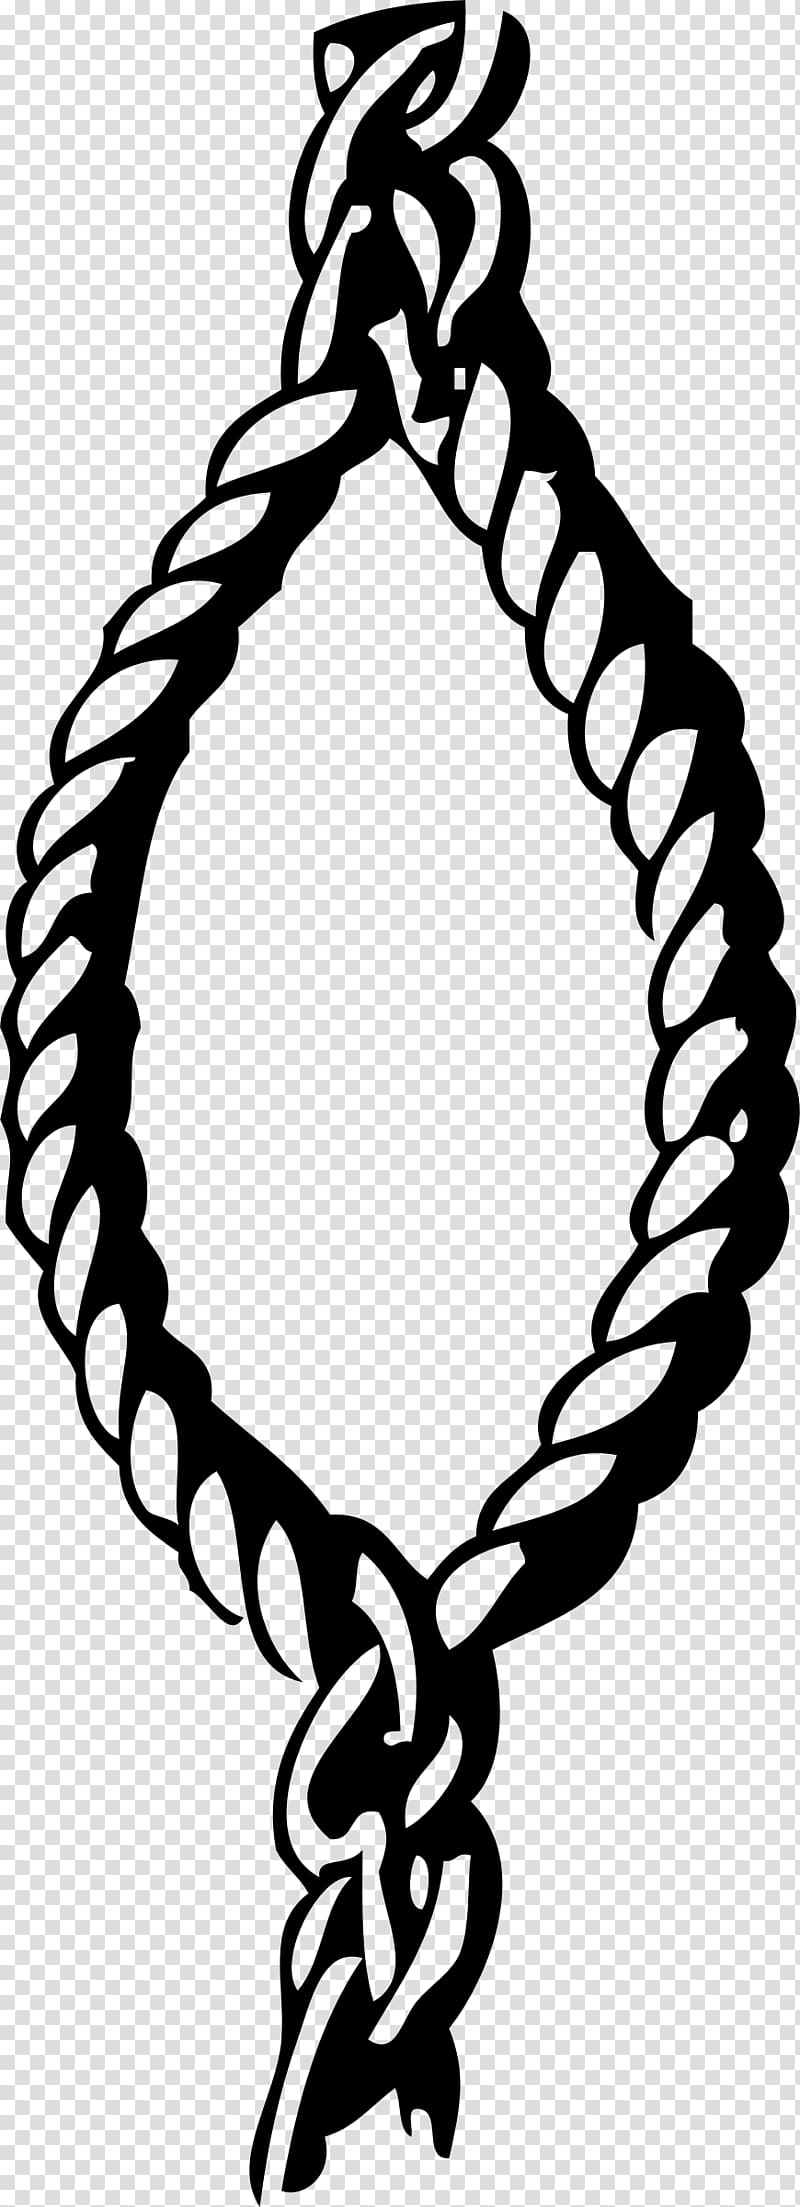 Knot Bowline on a bight Seizing, rope knot transparent background PNG clipart